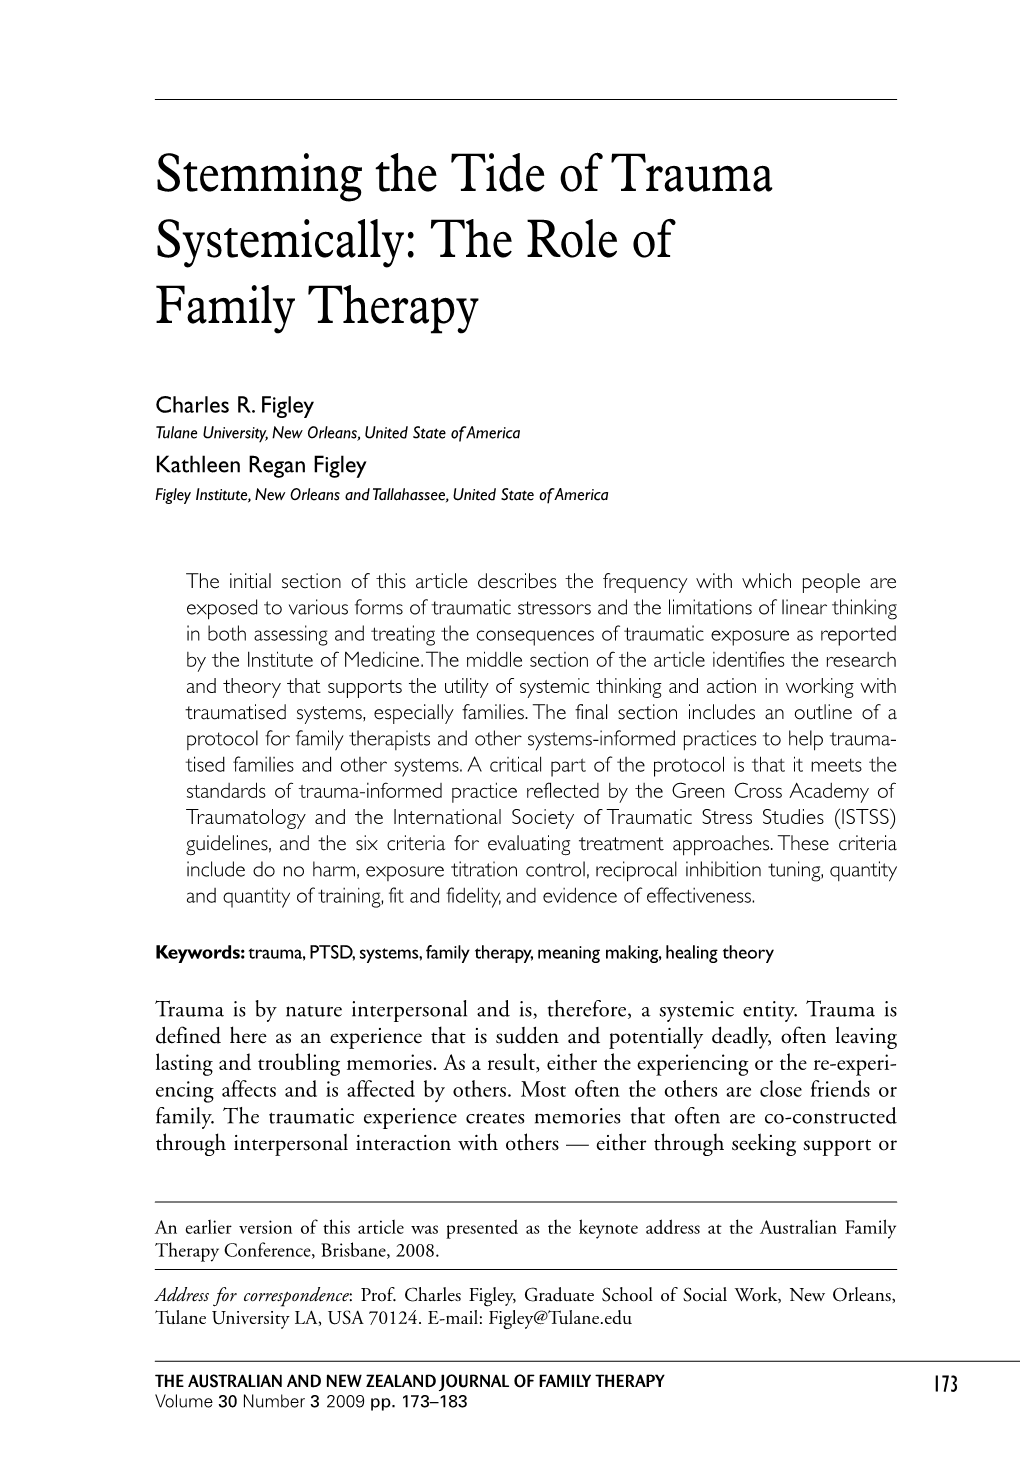 Stemming the Tide of Trauma Systemically: the Role of Family Therapy